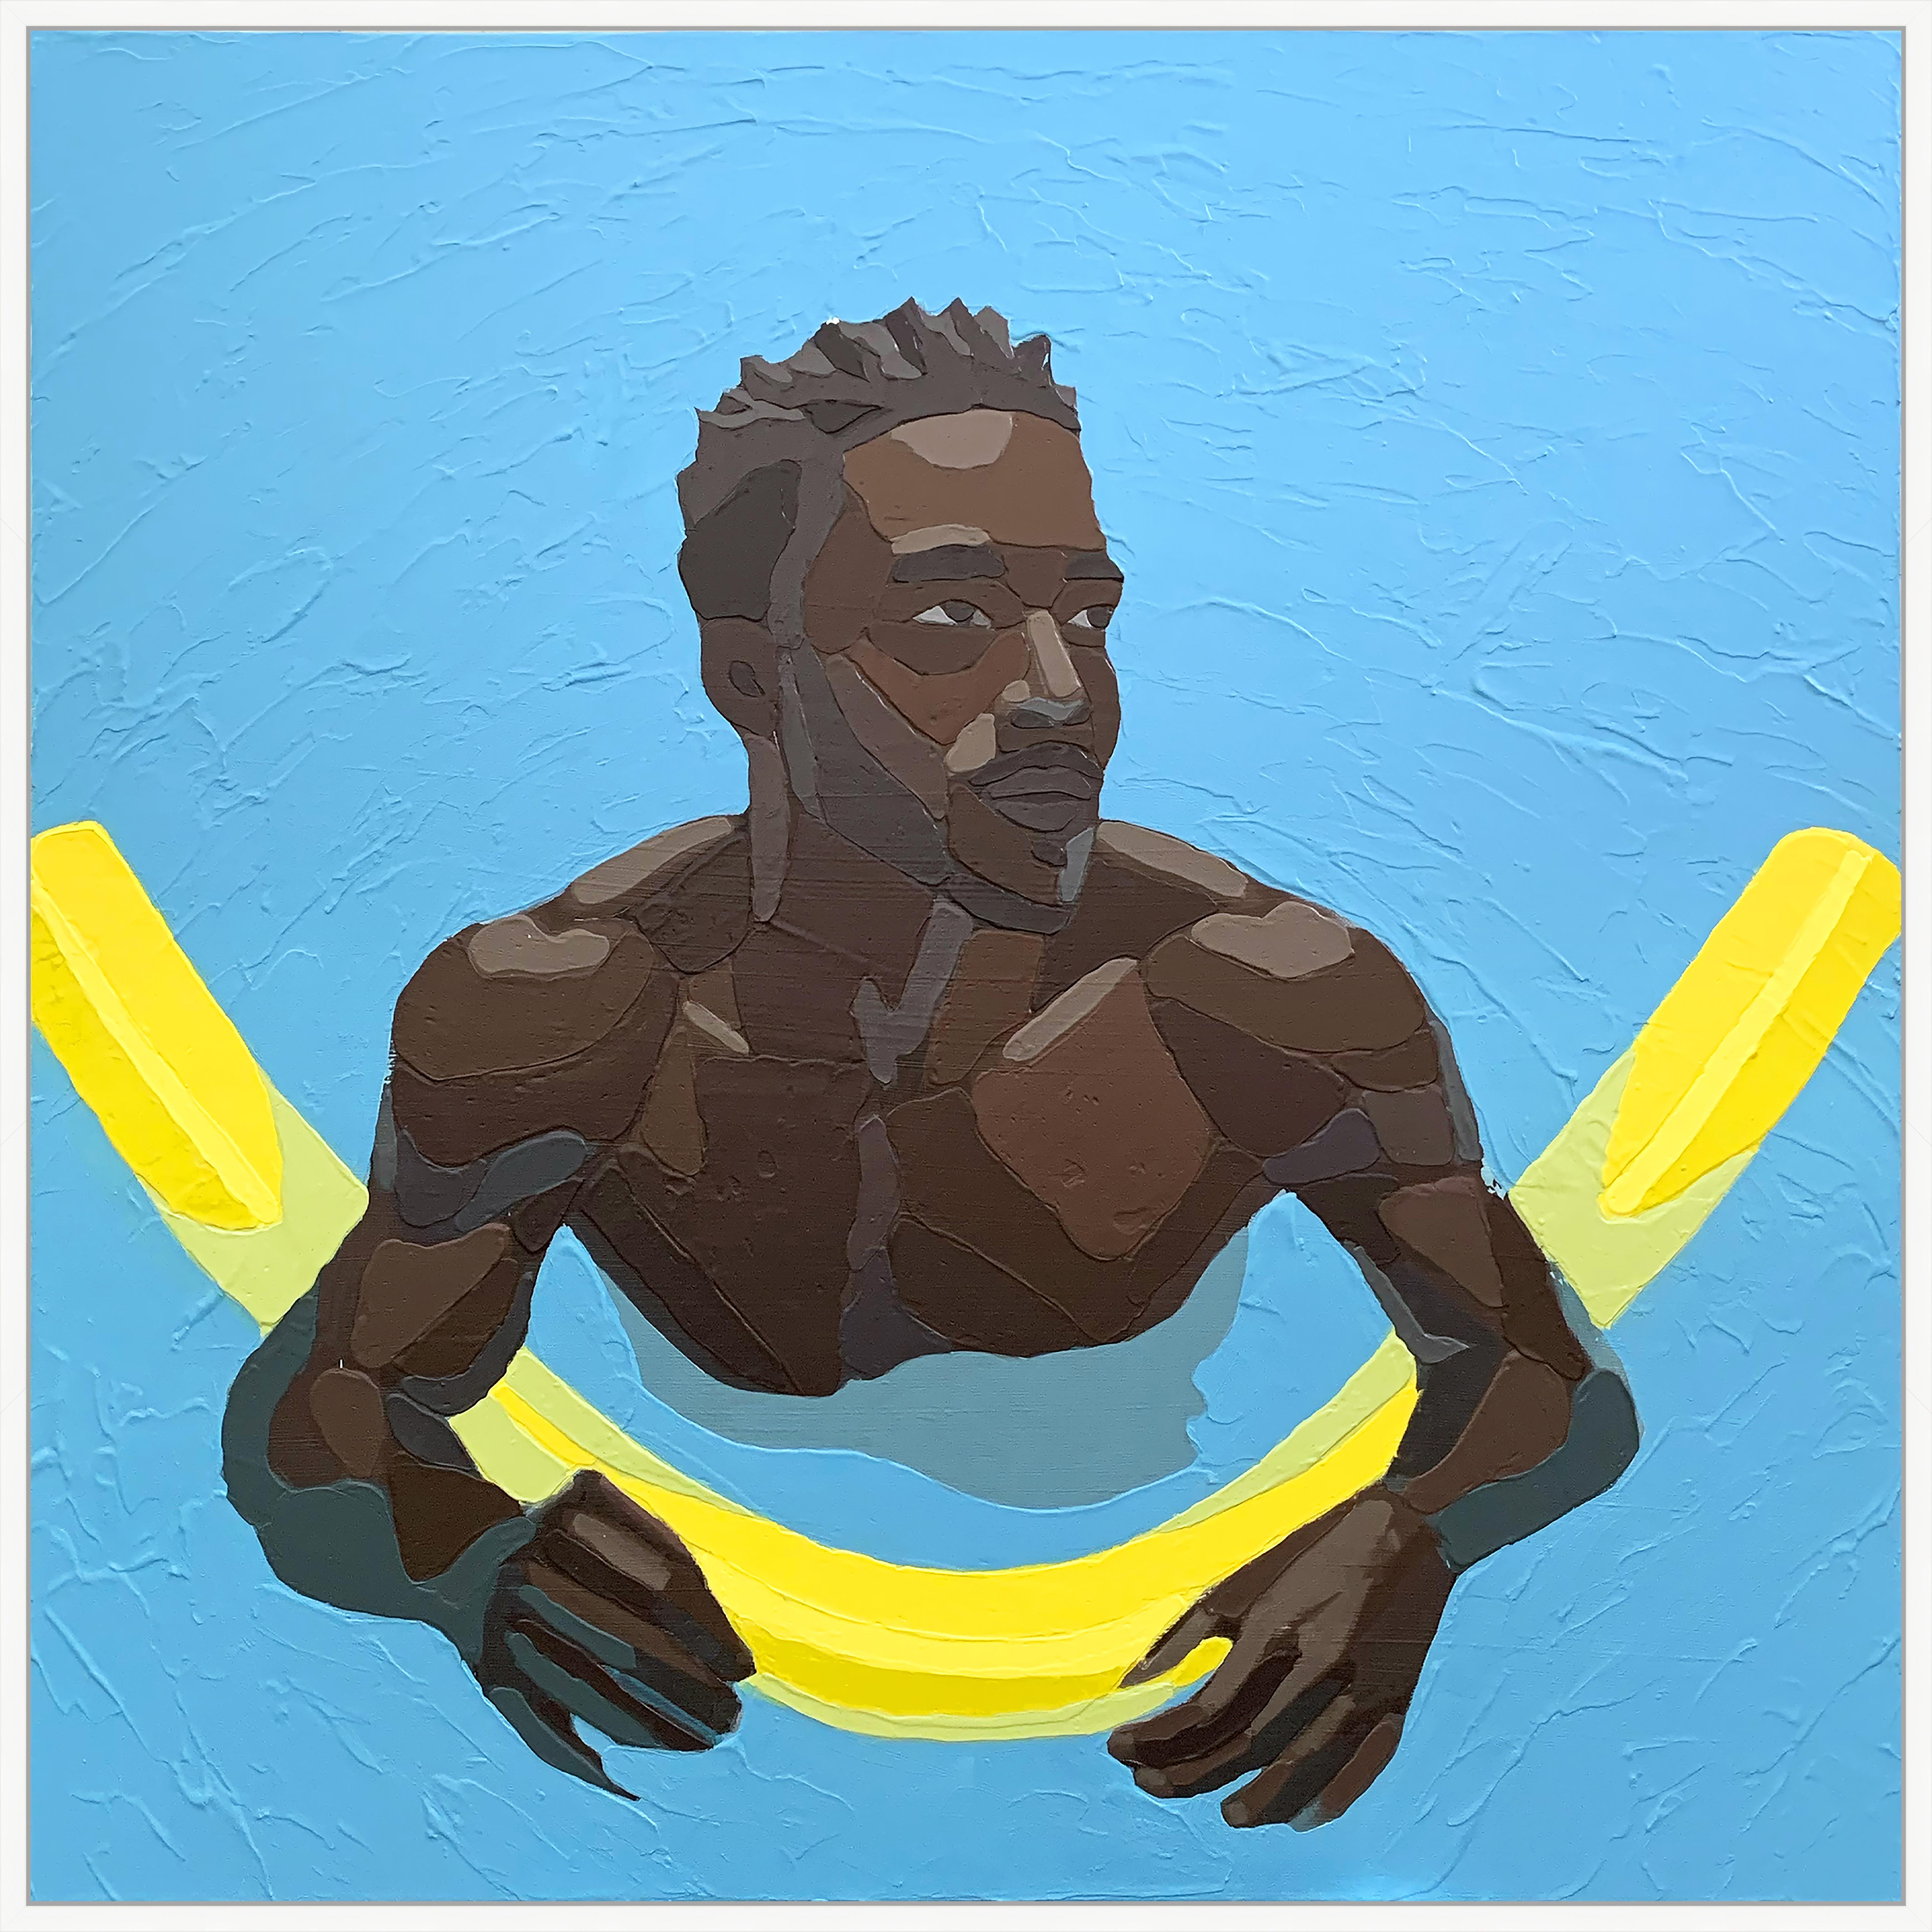 Andrew Gray Figurative Painting - "Colored Floater" - Original Acrylic Painting Featuring a Male Figure